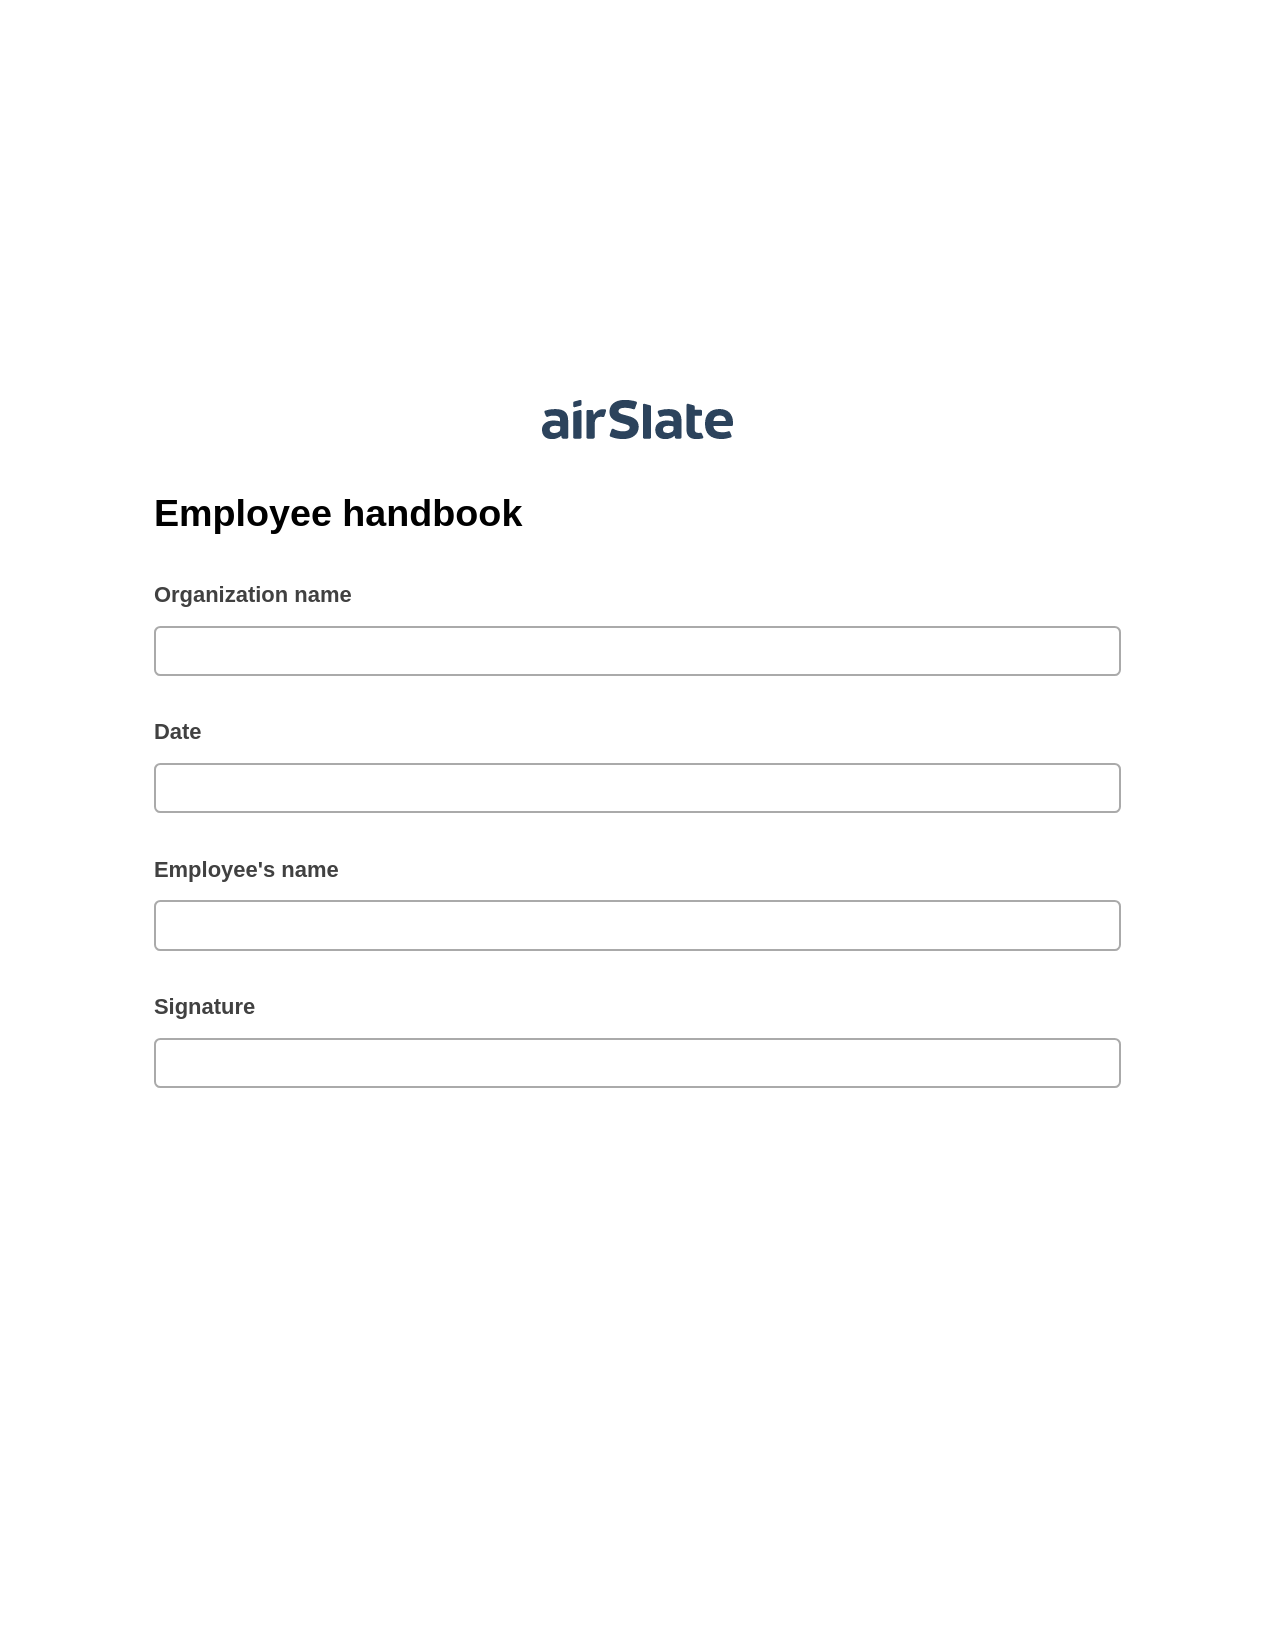 Employee handbook Pre-fill from CSV File Bot, Add Tags to Slate Bot, Text Message Notification Postfinish Bot